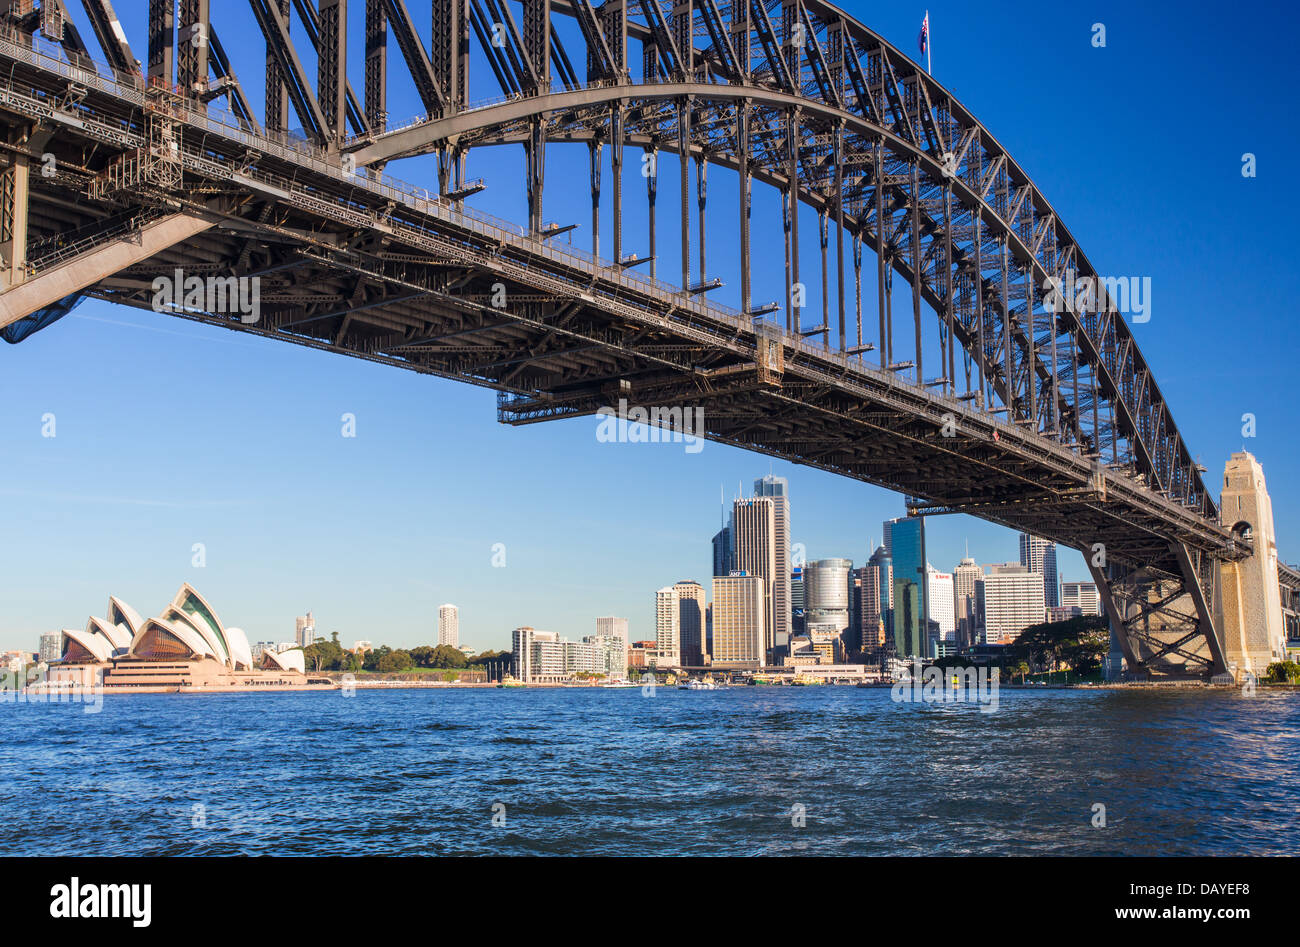 View of Sydney city CBD and the Sydney Harbour Bridge from the north shore, Australia Stock Photo